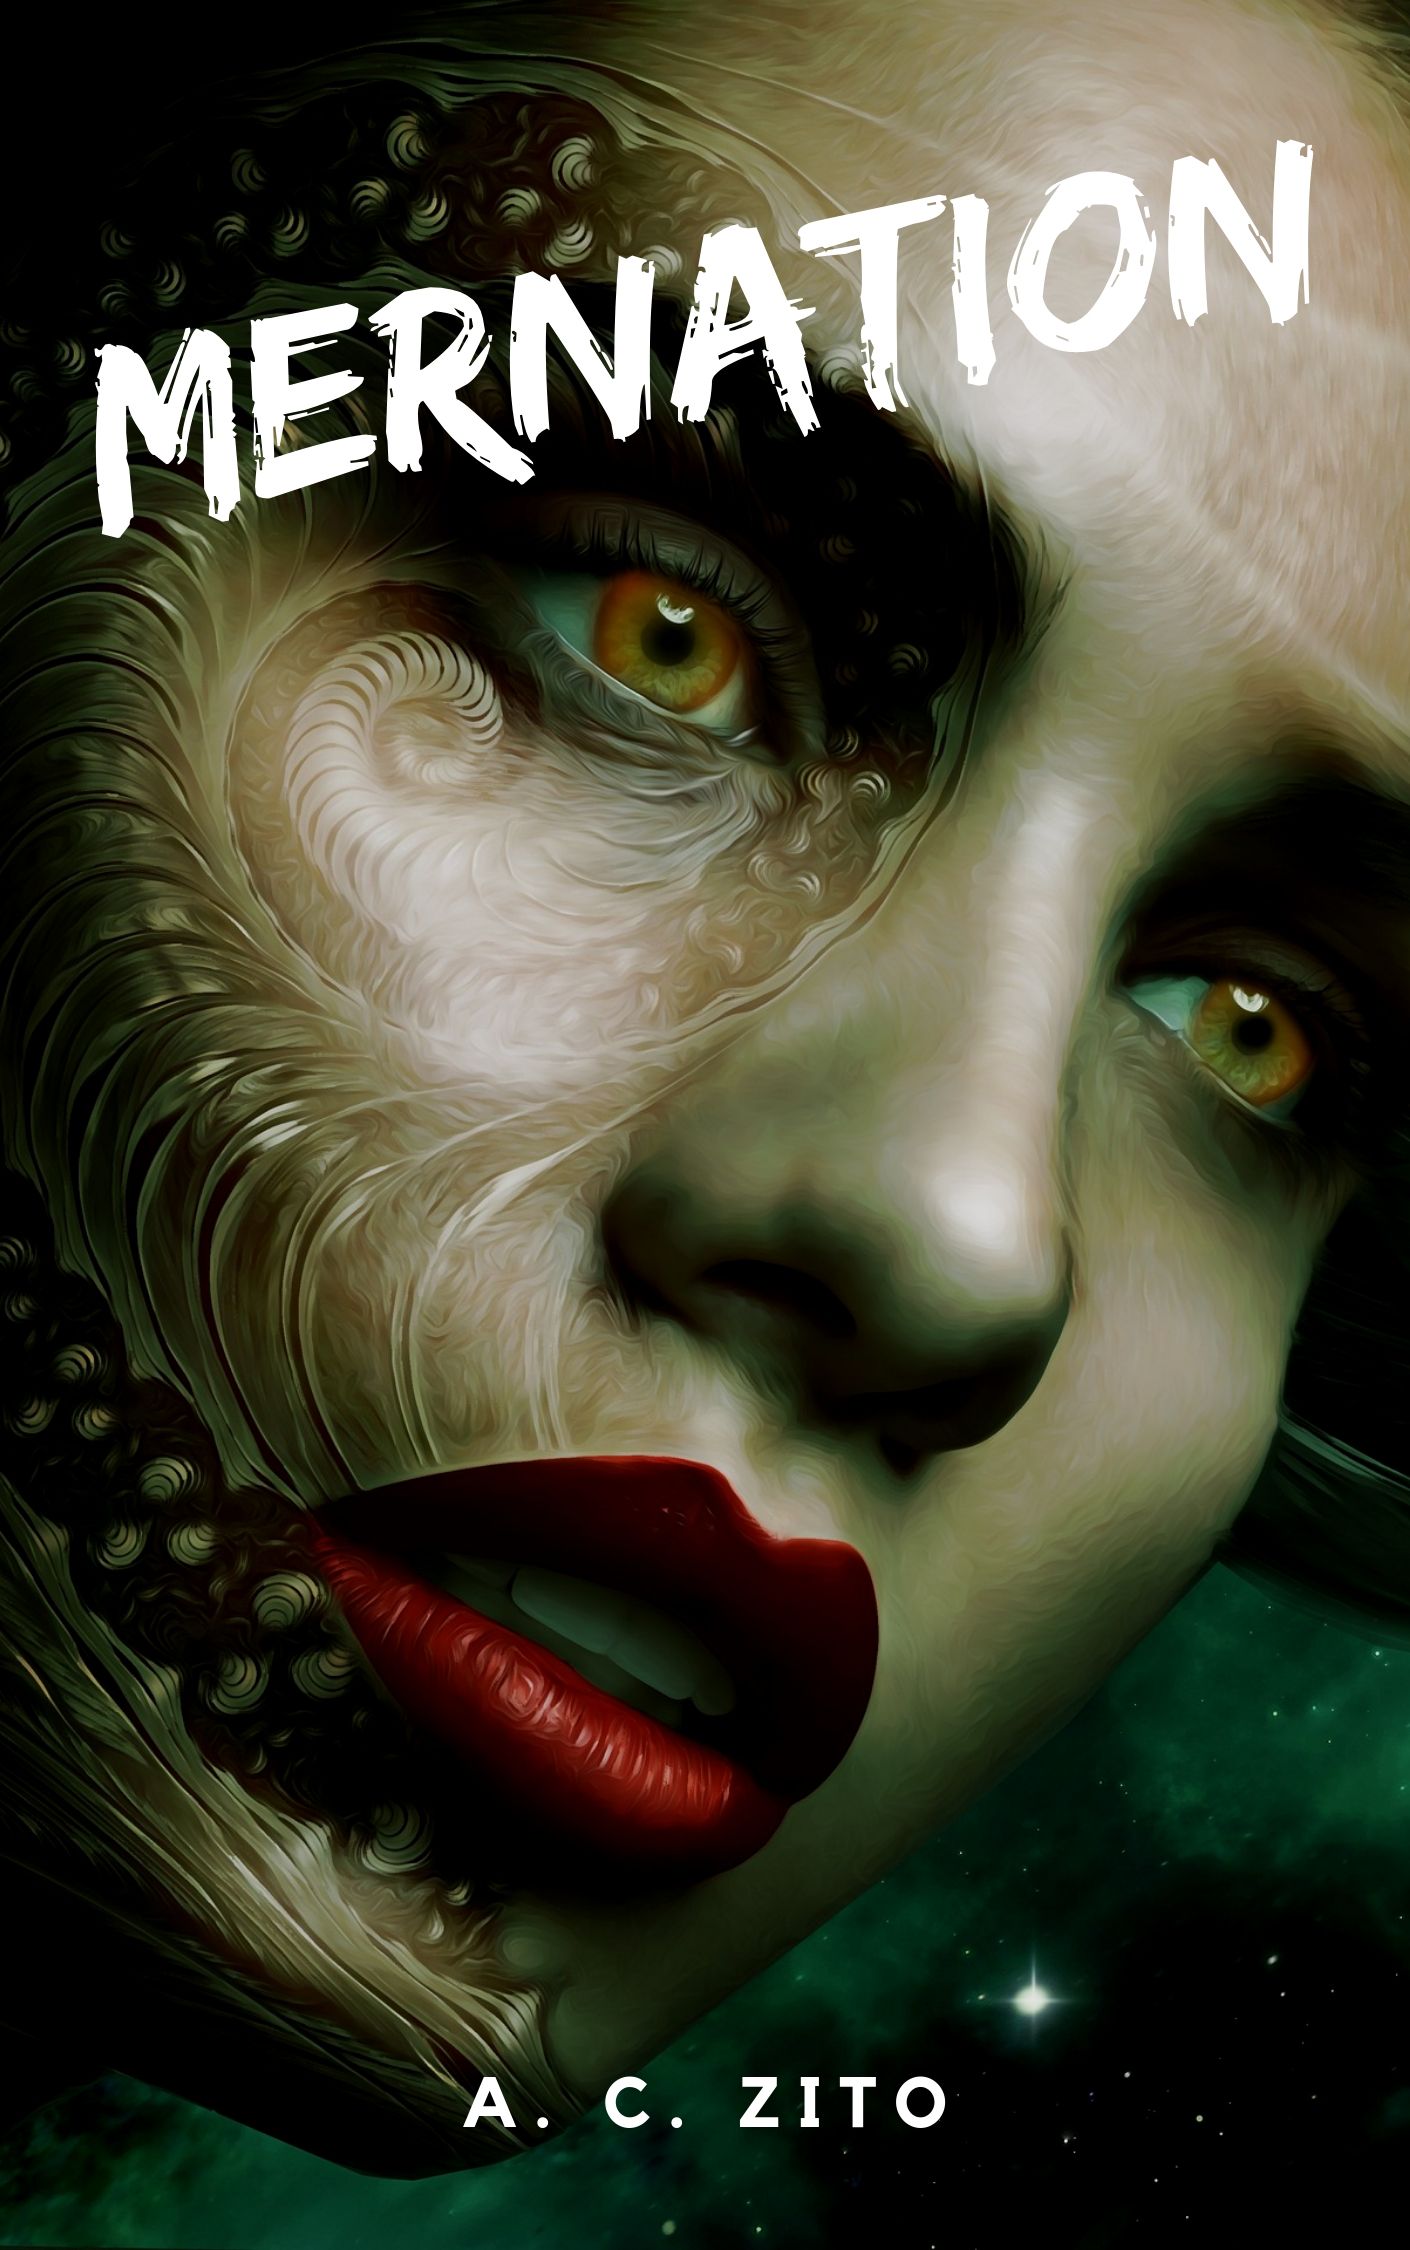 FREE: Mernation by A. C. Zito